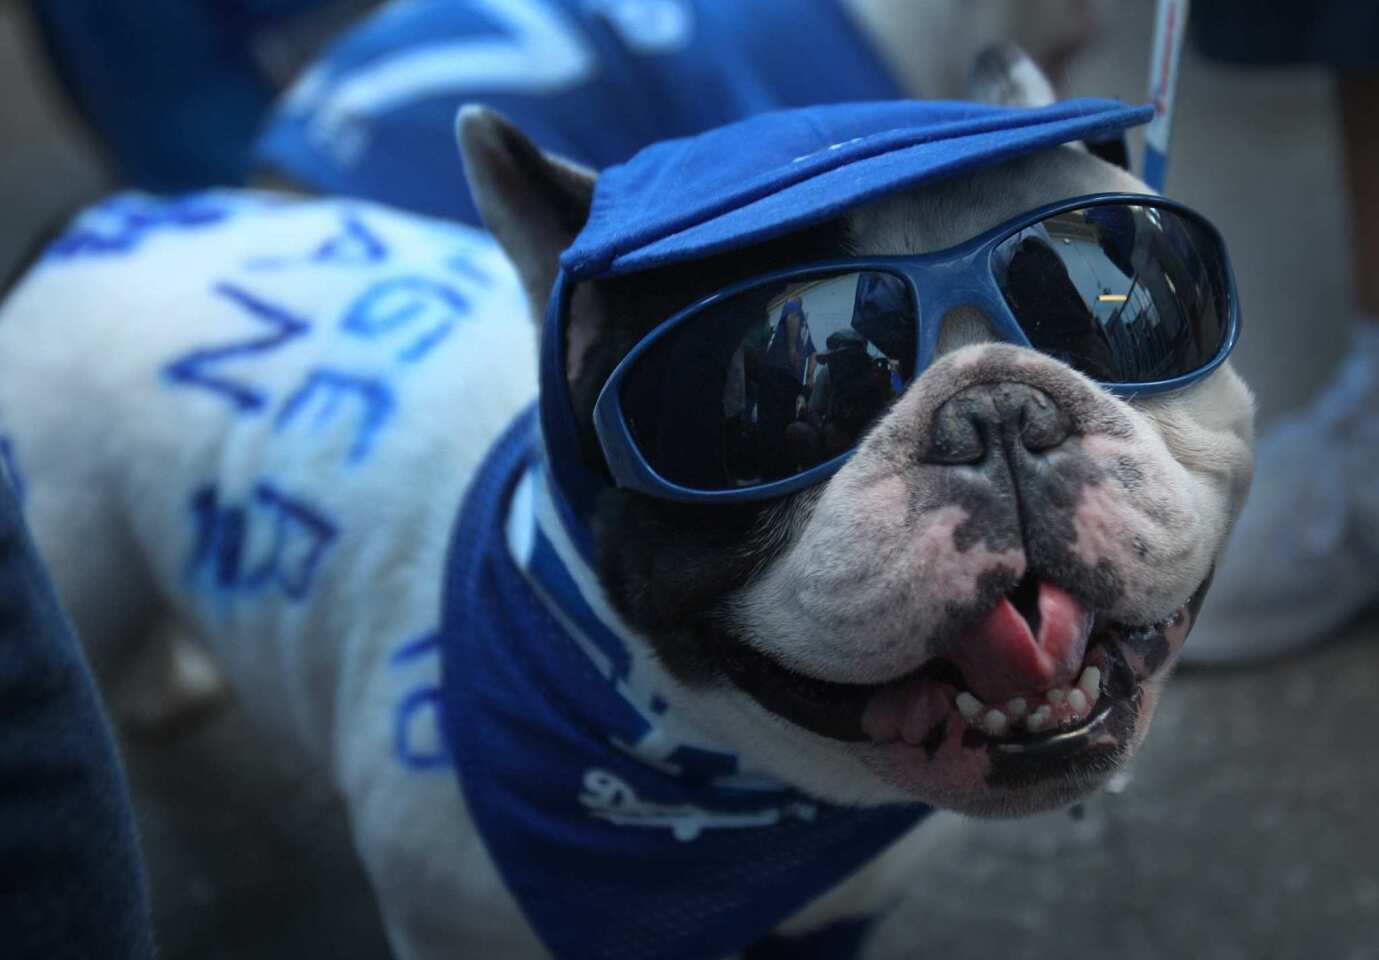 On this day, Dodger Stadium goes to the dogs - Los Angeles Times